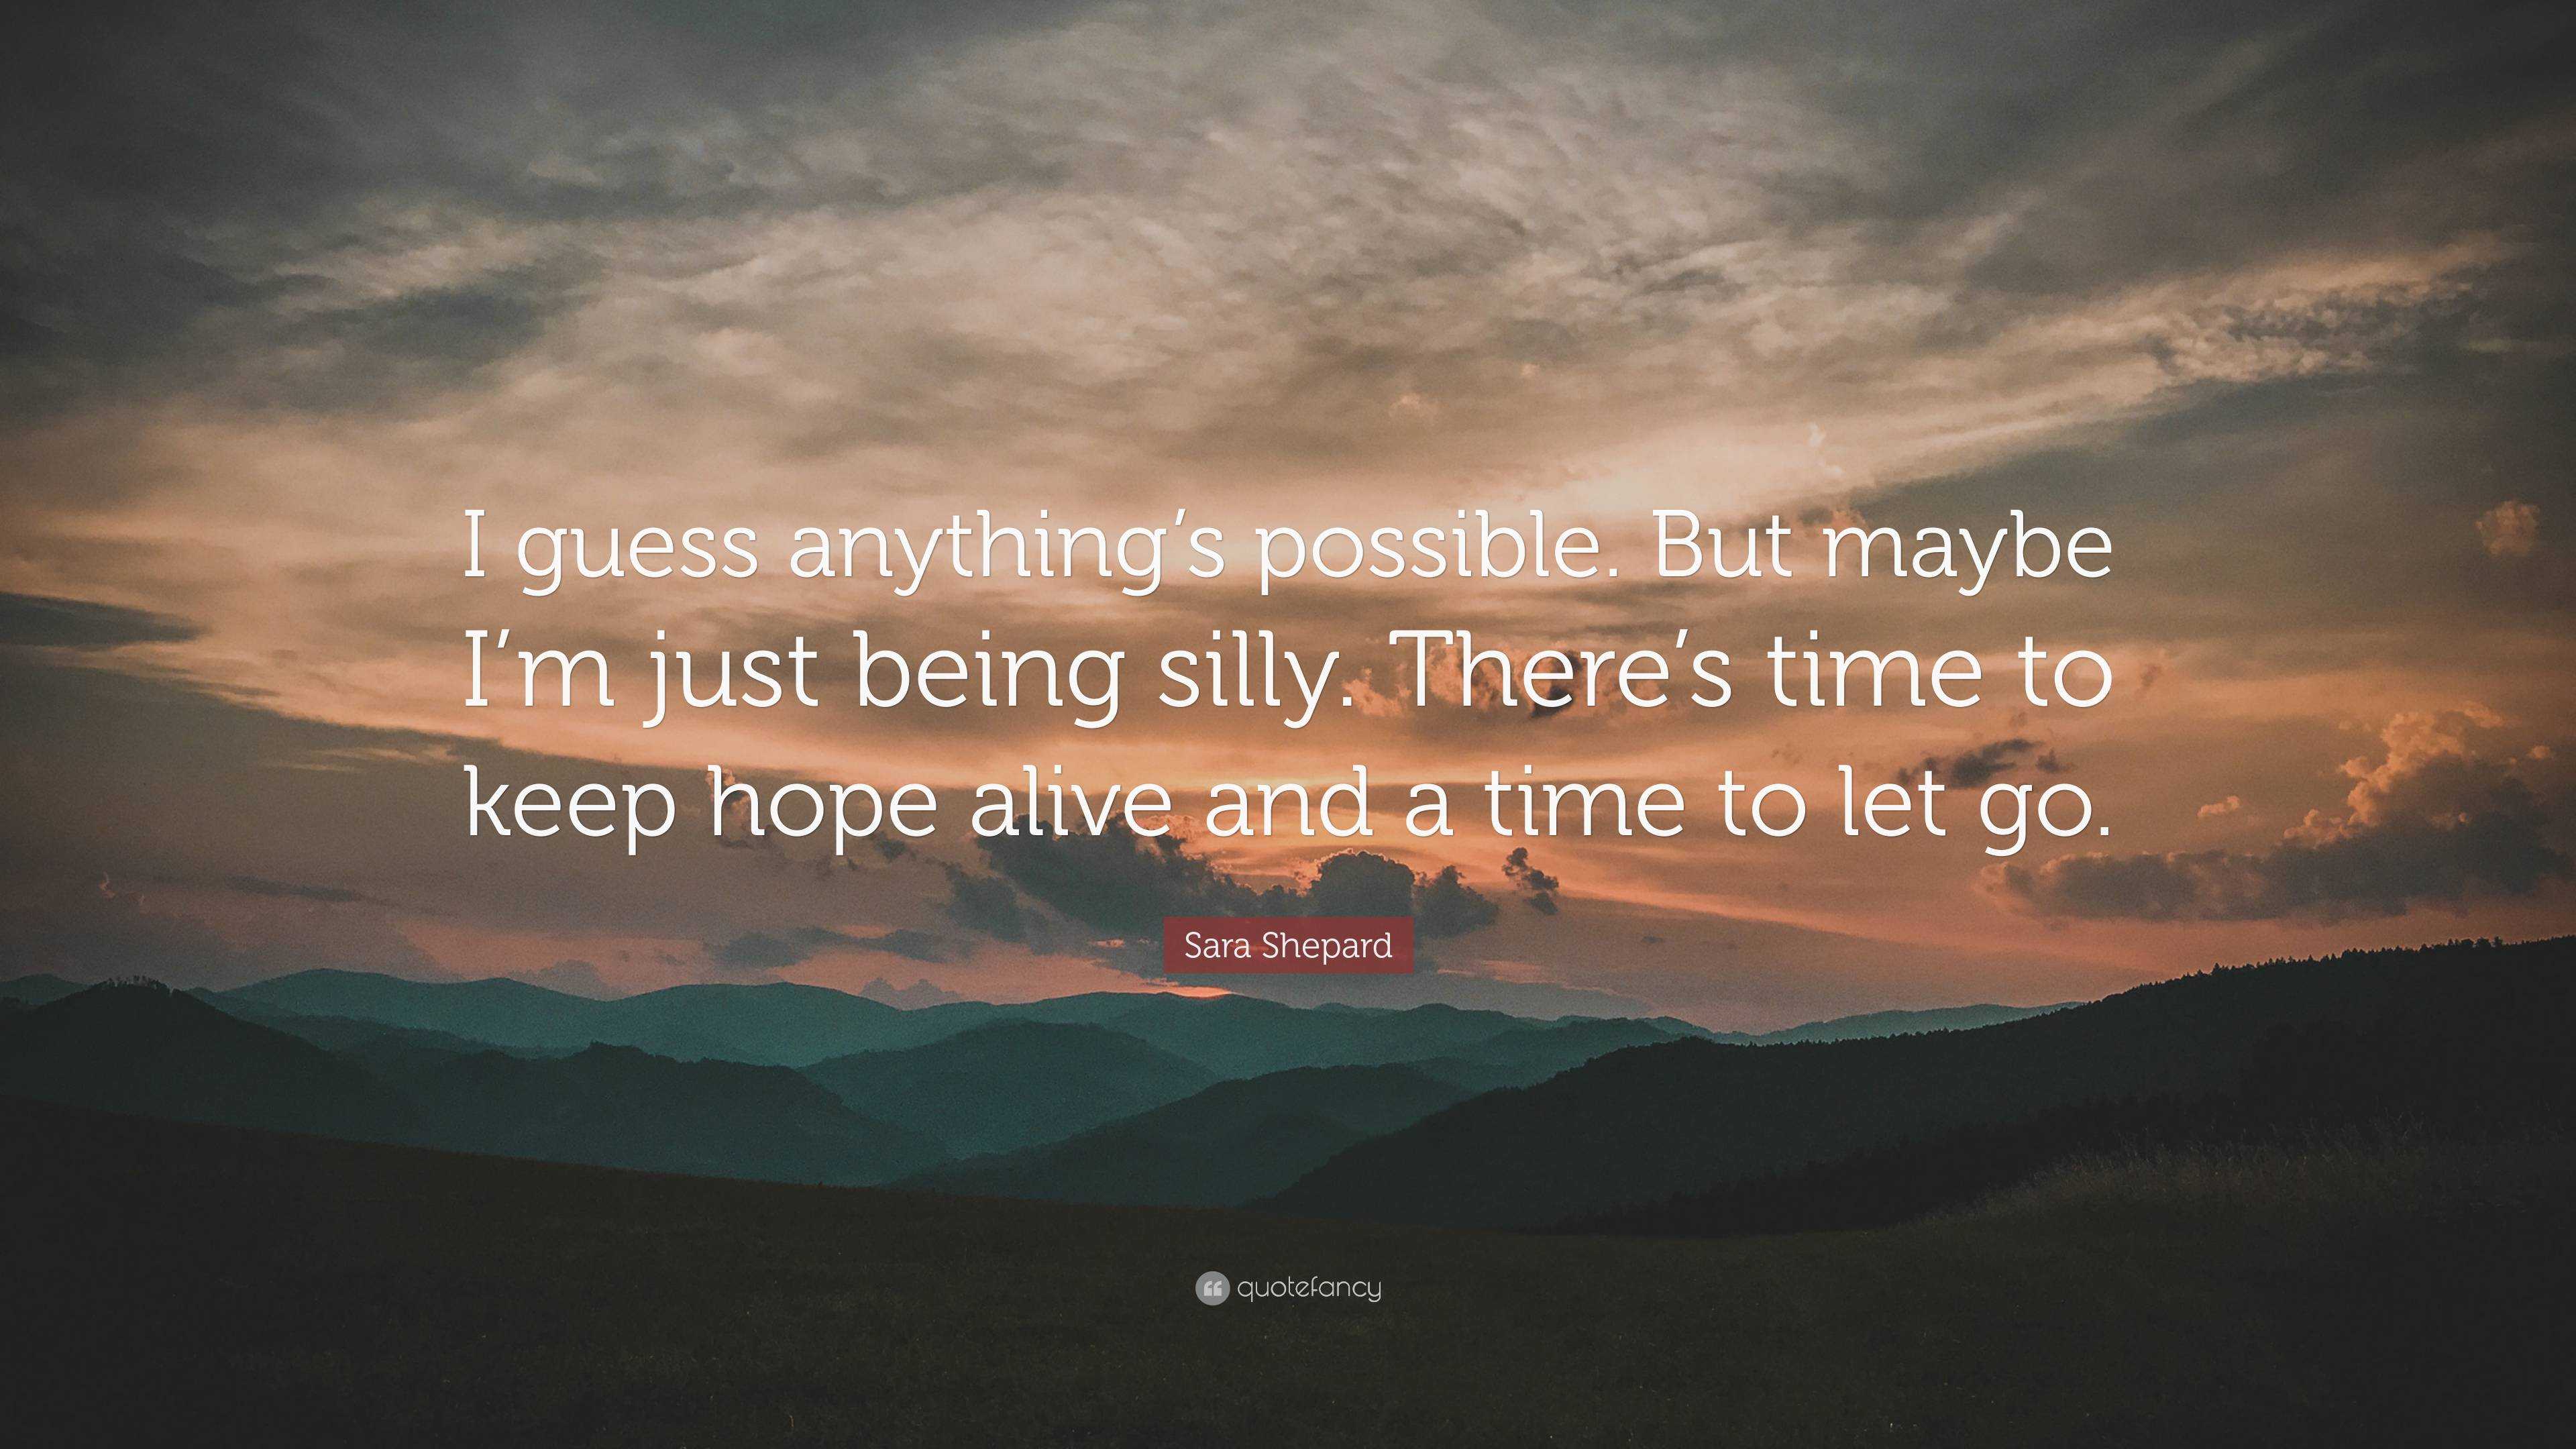 Sara Shepard Quote: “I guess possible. But maybe I'm just being silly. There's time